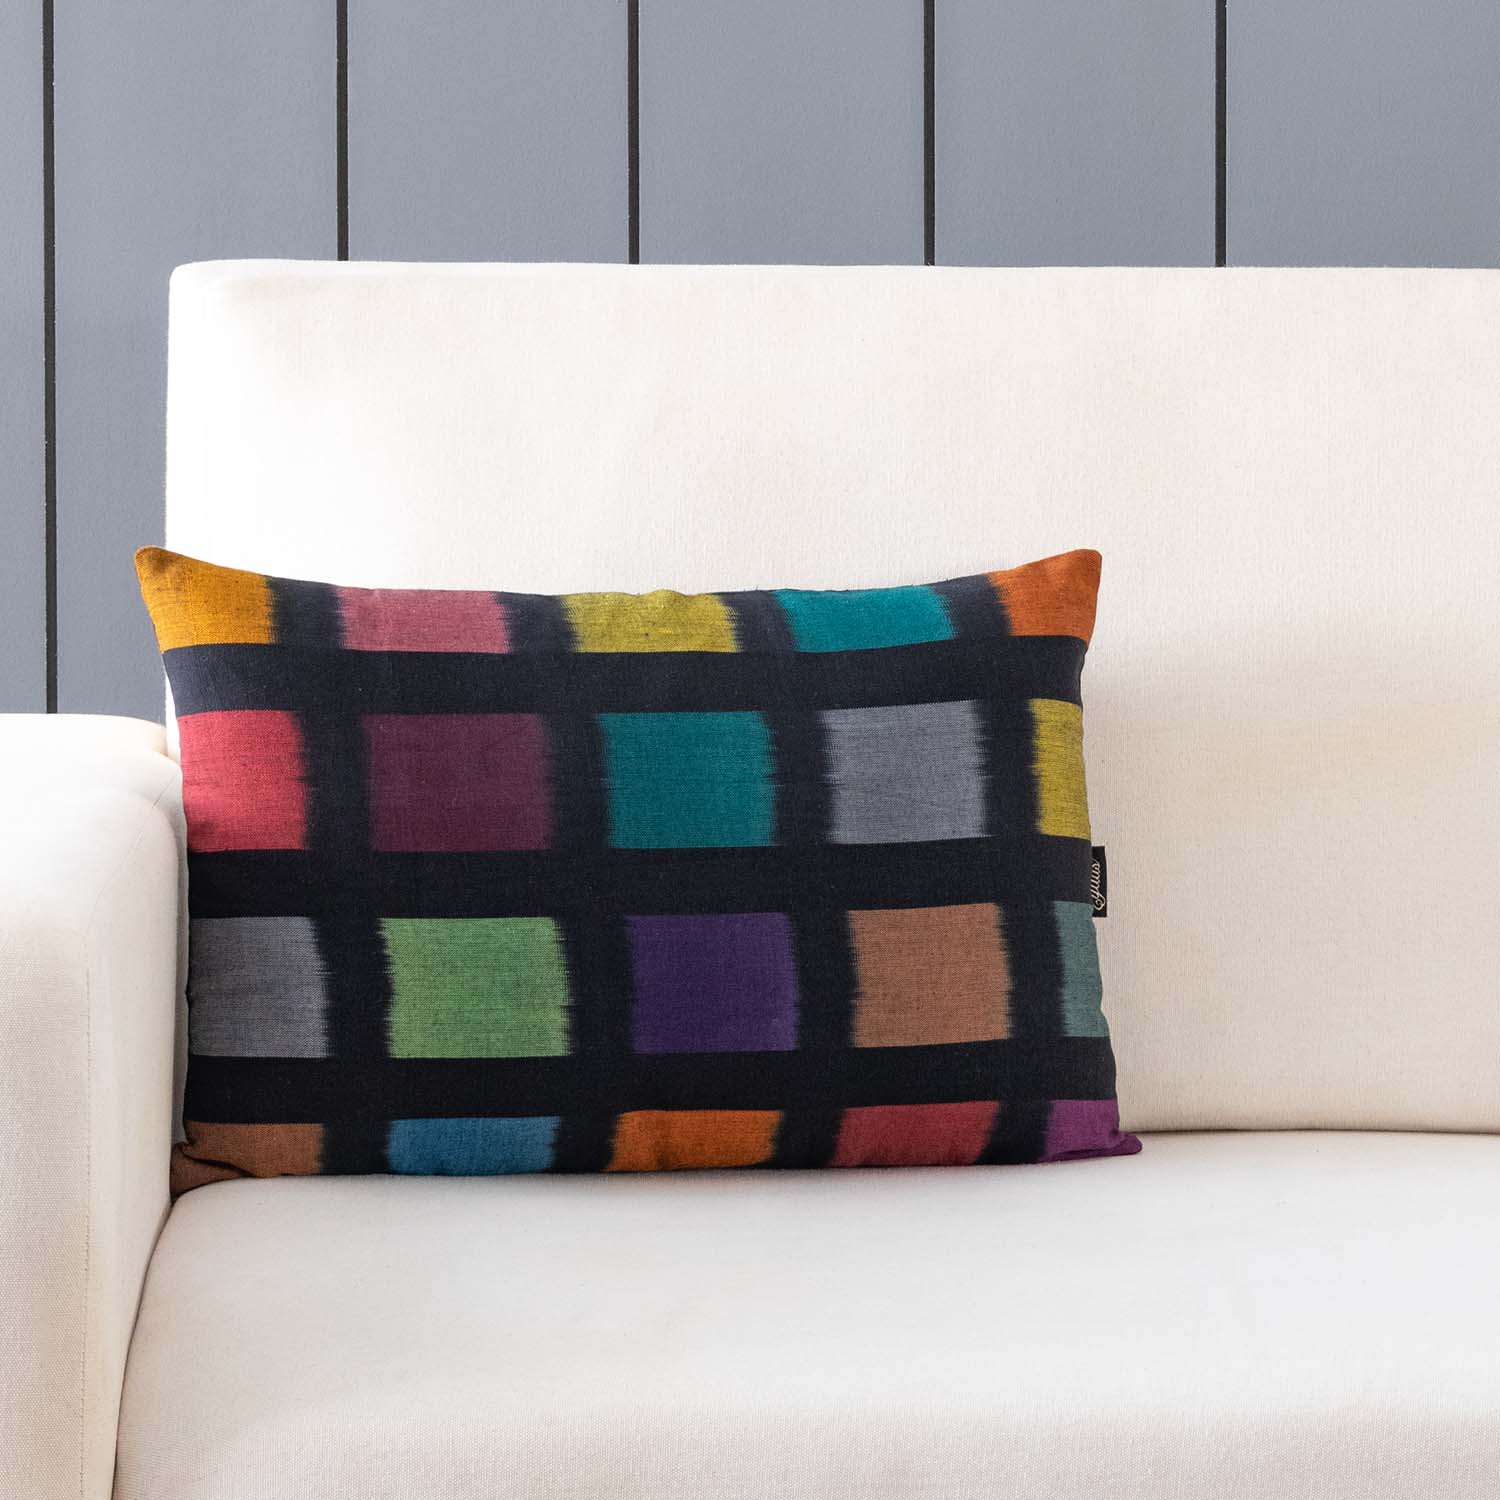 Handwoven Ikat Cushion Cover - 12x12